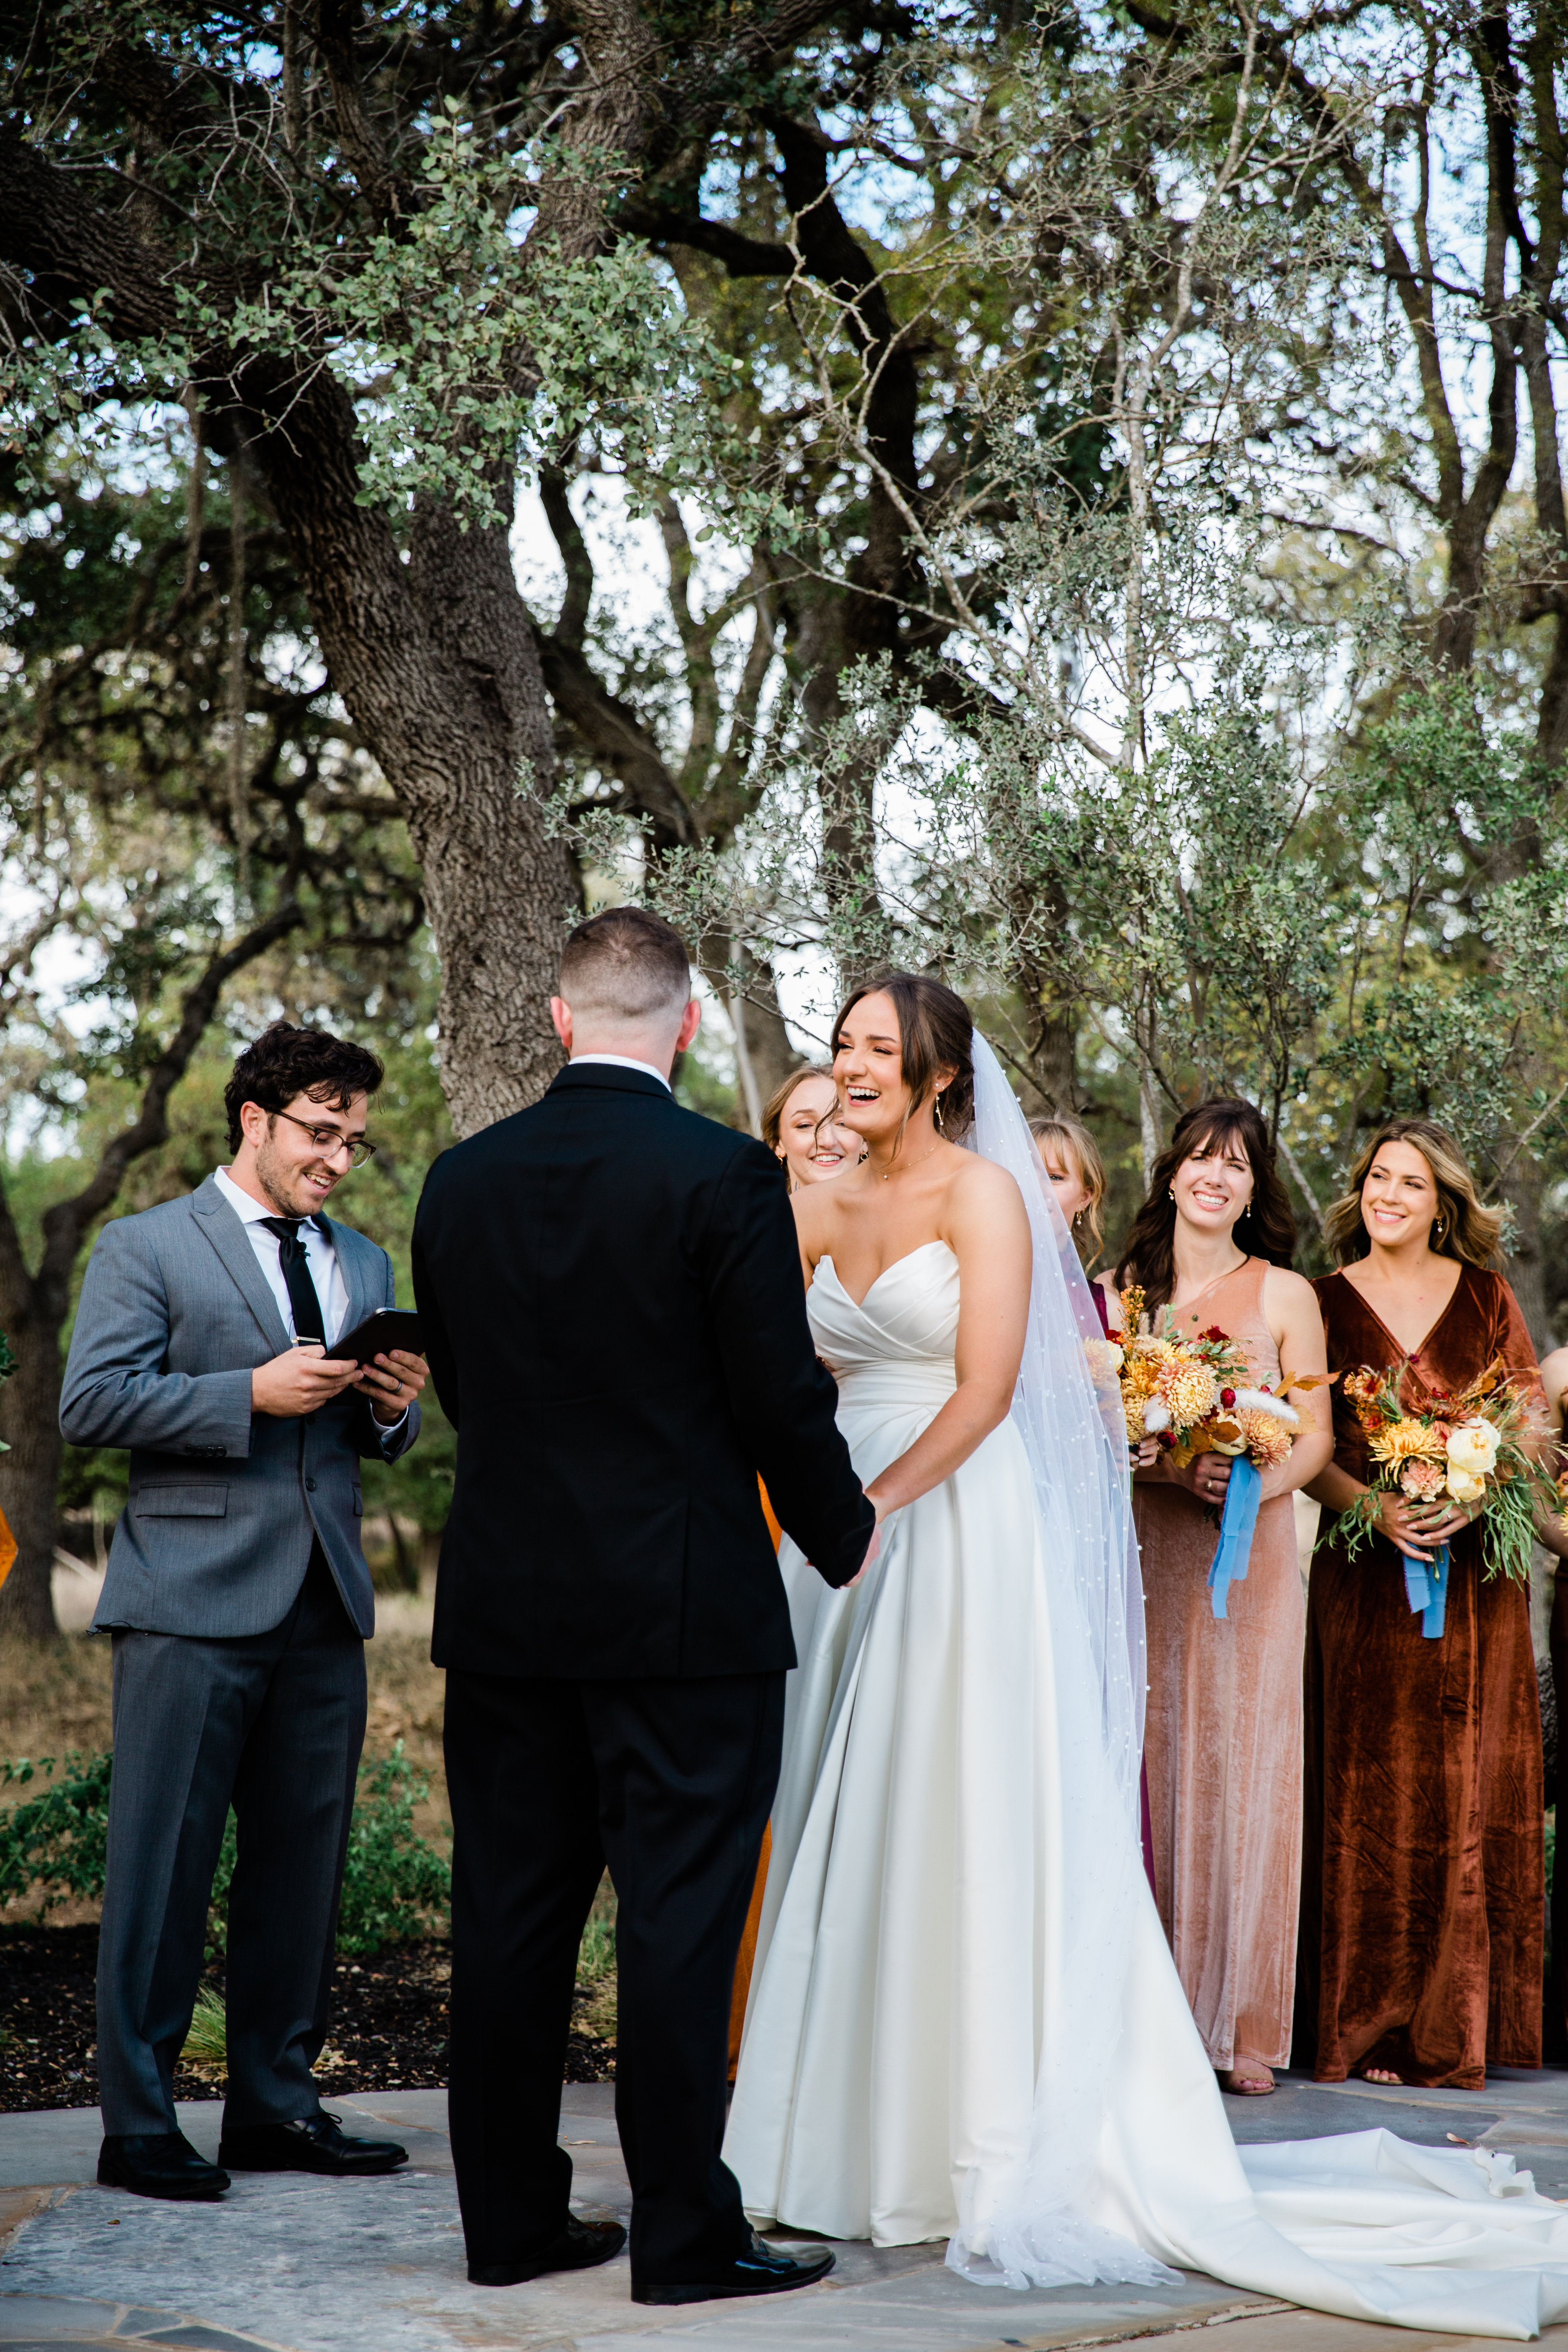 A breathtaking sunset ceremony, casting a warm glow over the couple as they exchange vows.